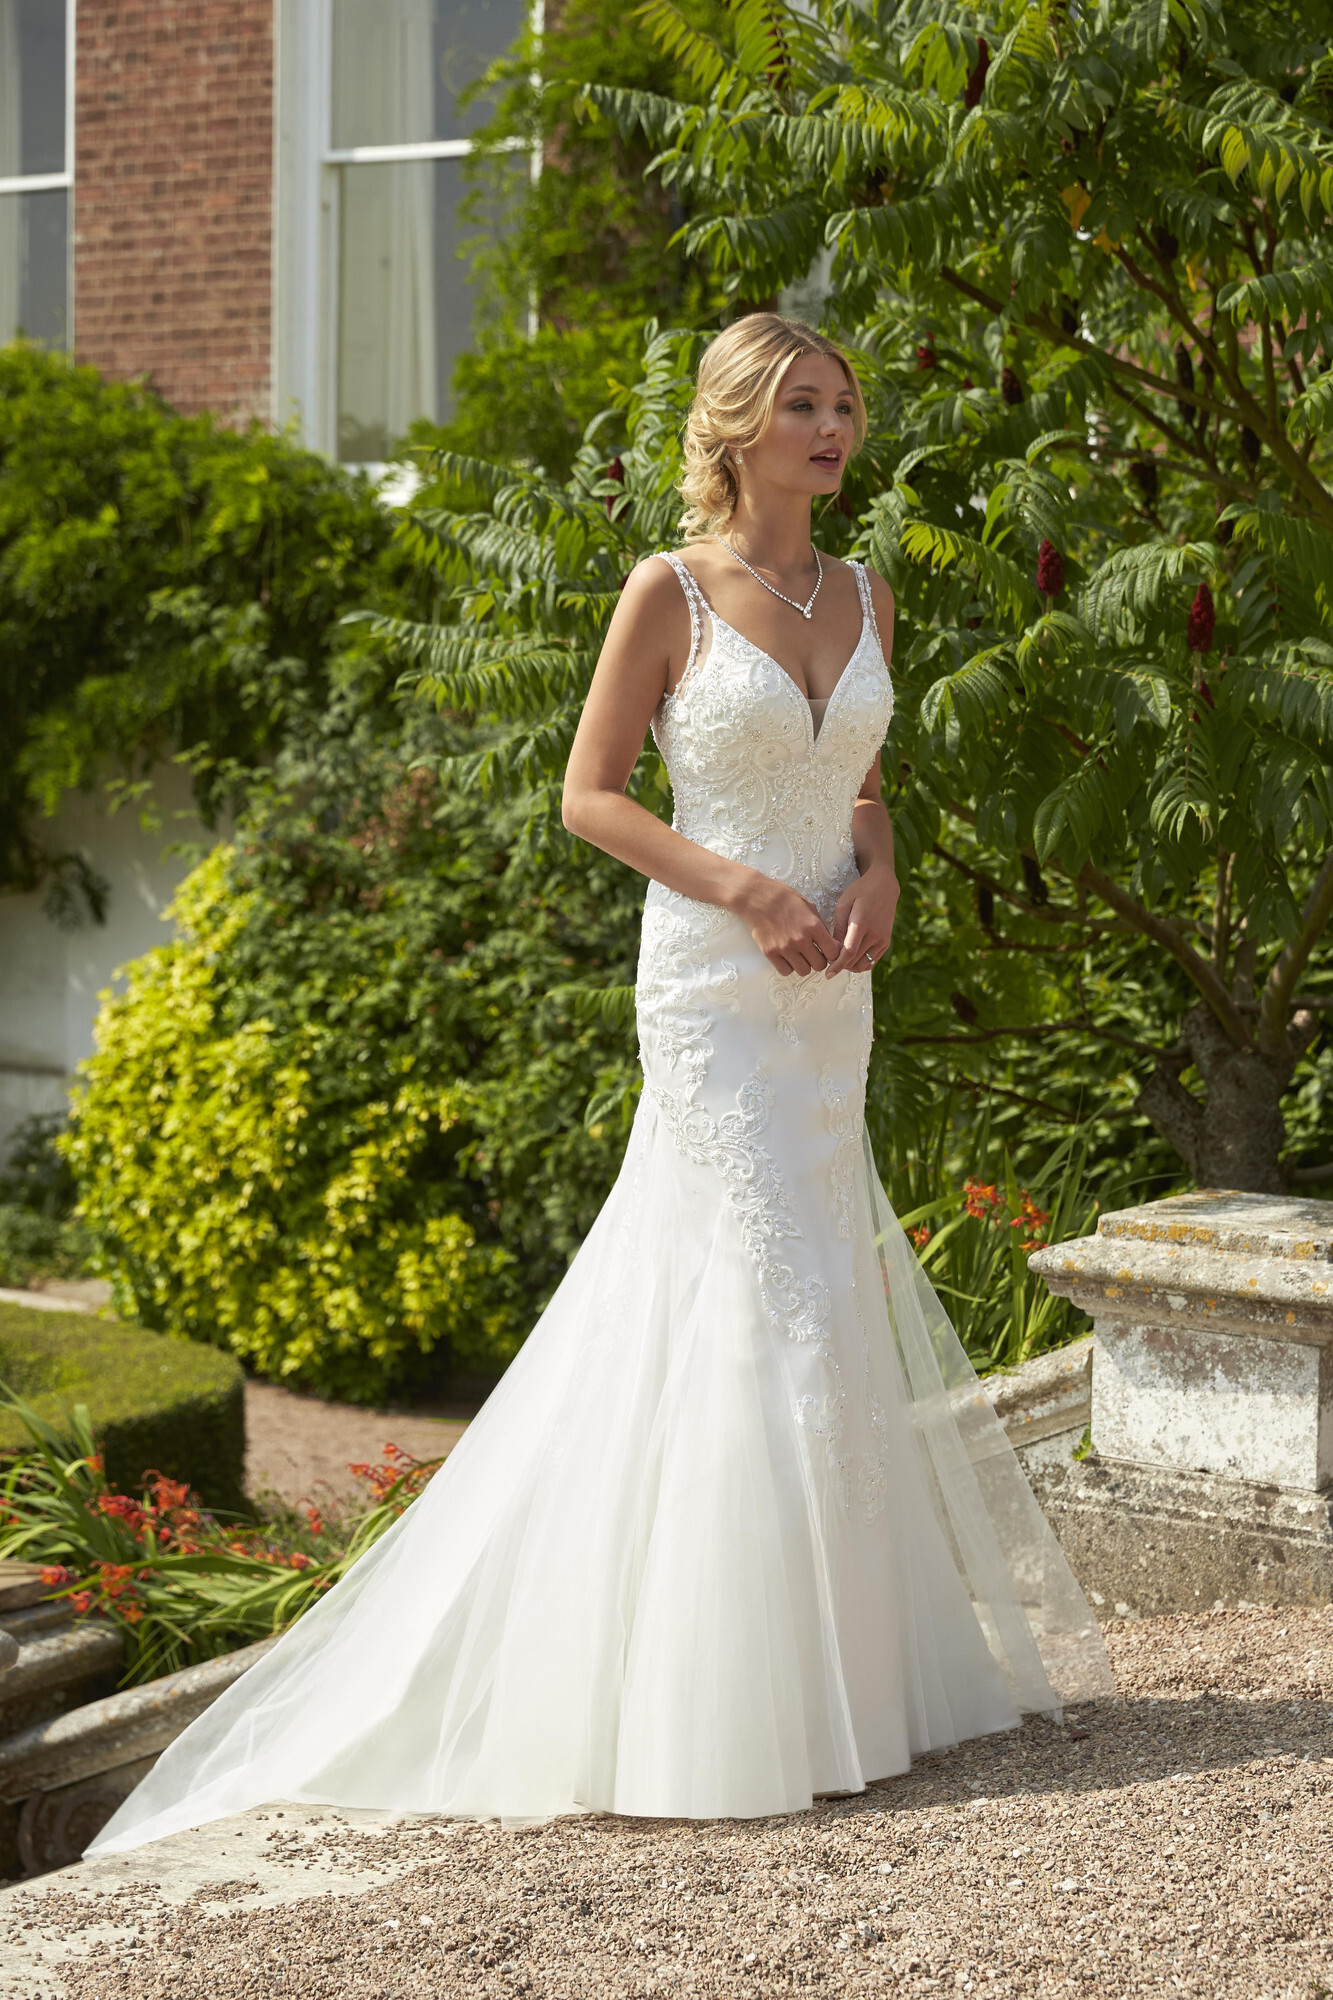 Geraldine Wedding Dress from Romantica - hitched.co.uk